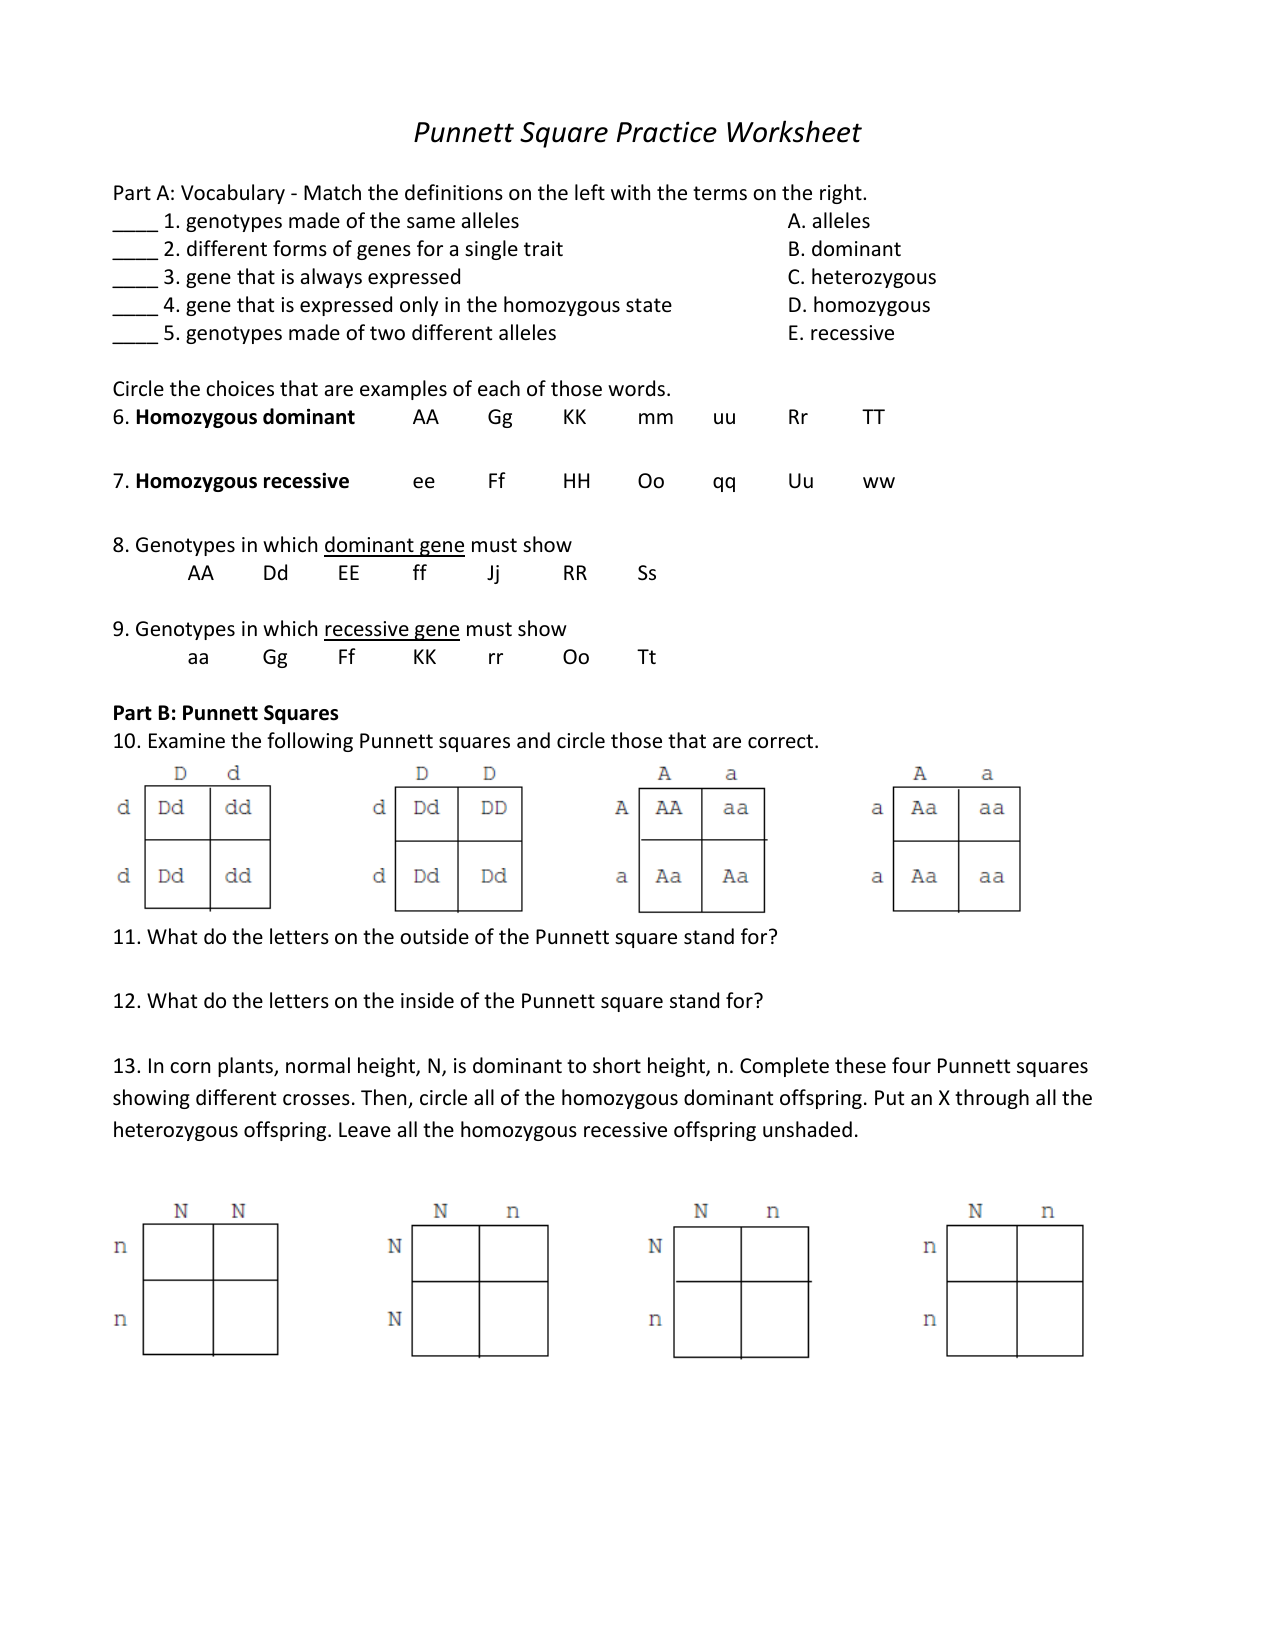 Punnett Square Practice Worksheet Part A: Vocabulary For Genetics Problems Worksheet Answers